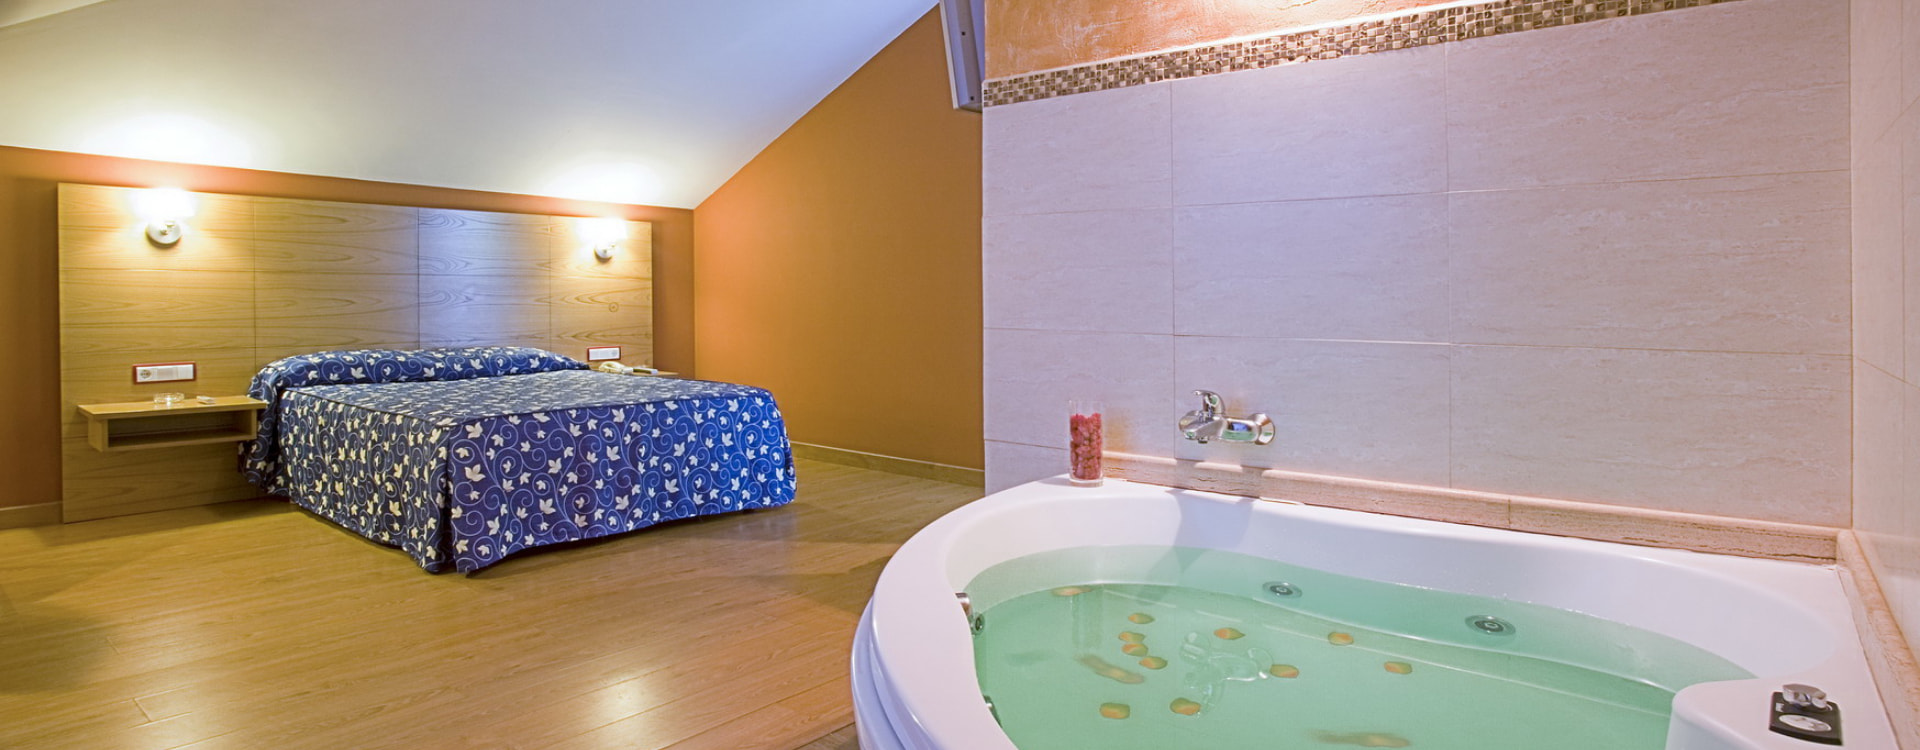 Stay with double bed and hydro-massage bath at Hotel Los Pasiegos